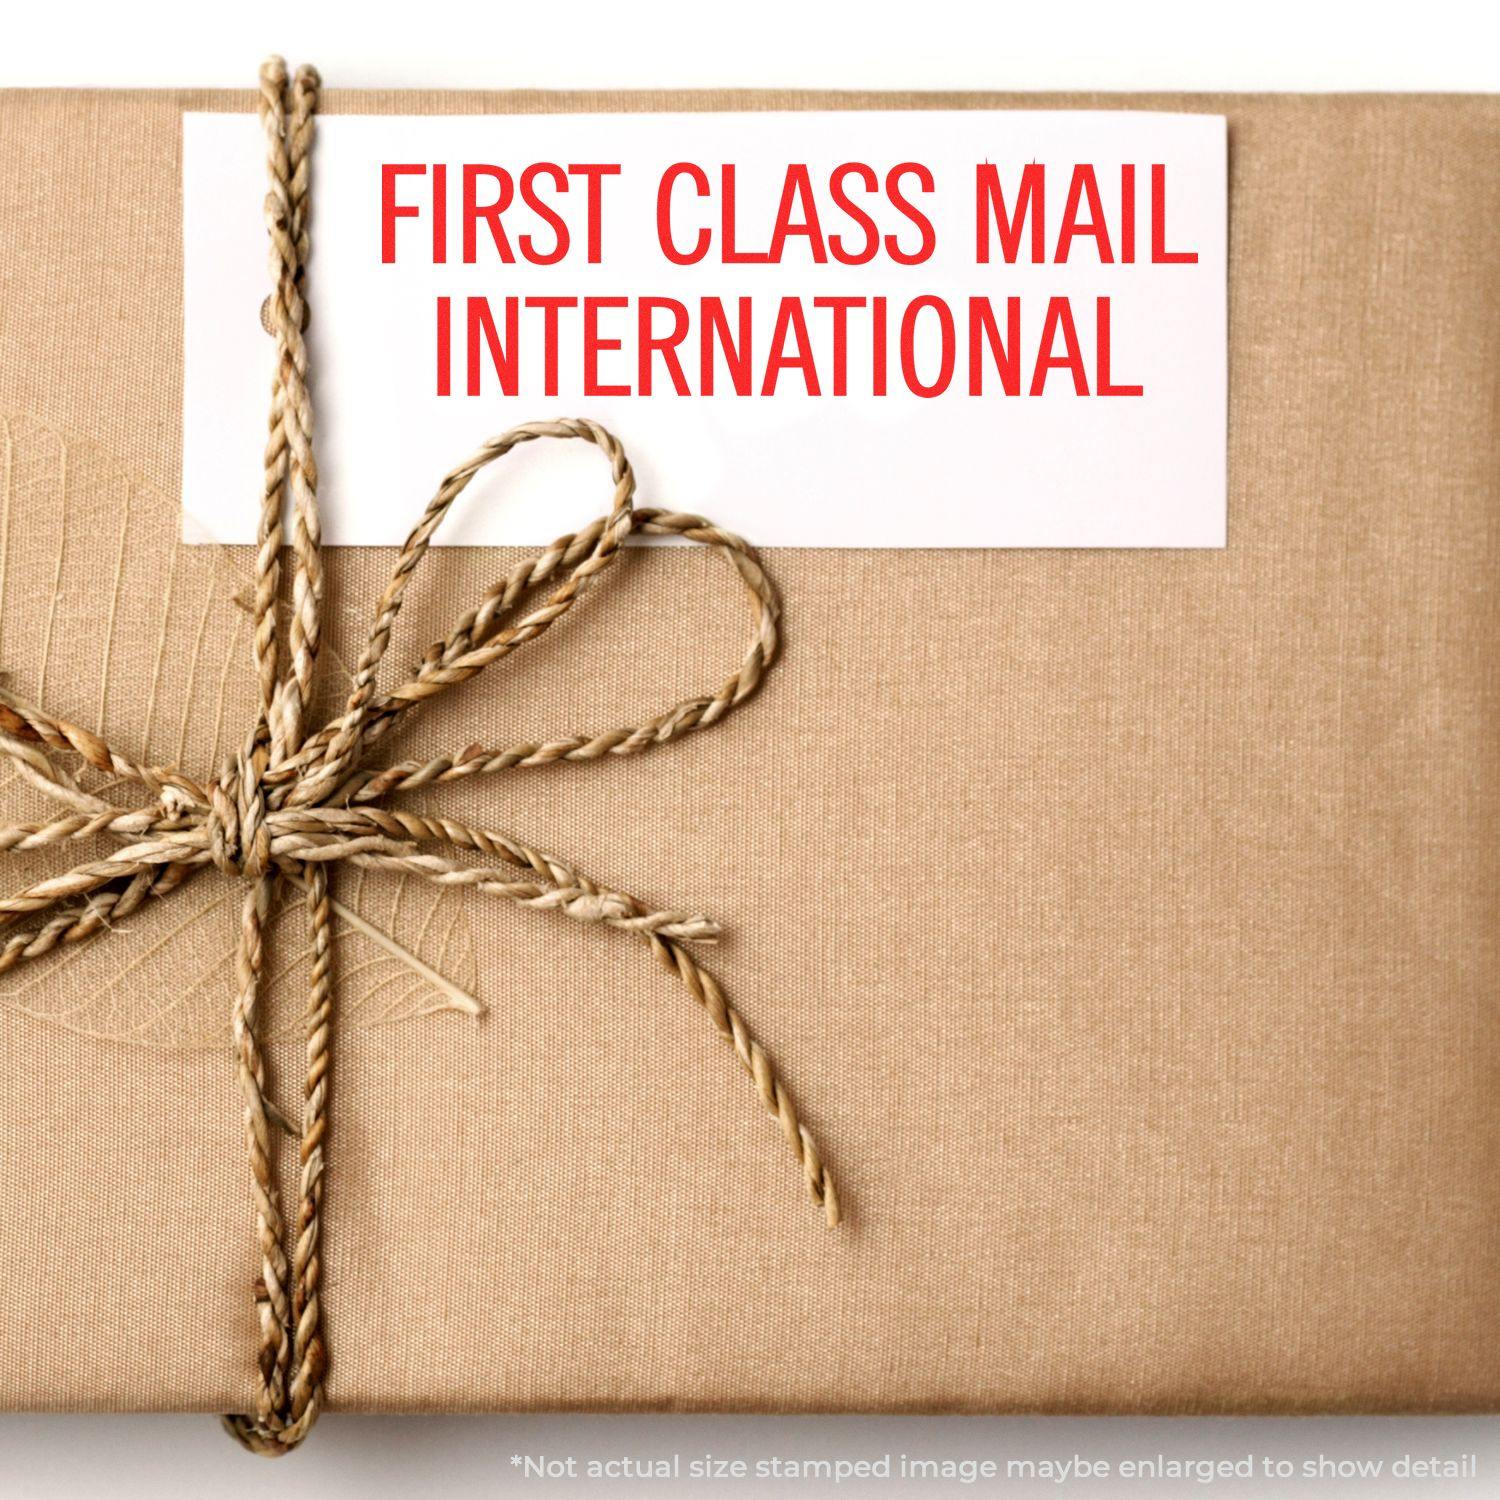 A self-inking stamp with a stamped image showing how the text "FIRST CLASS MAIL INTERNATIONAL" is displayed after stamping.